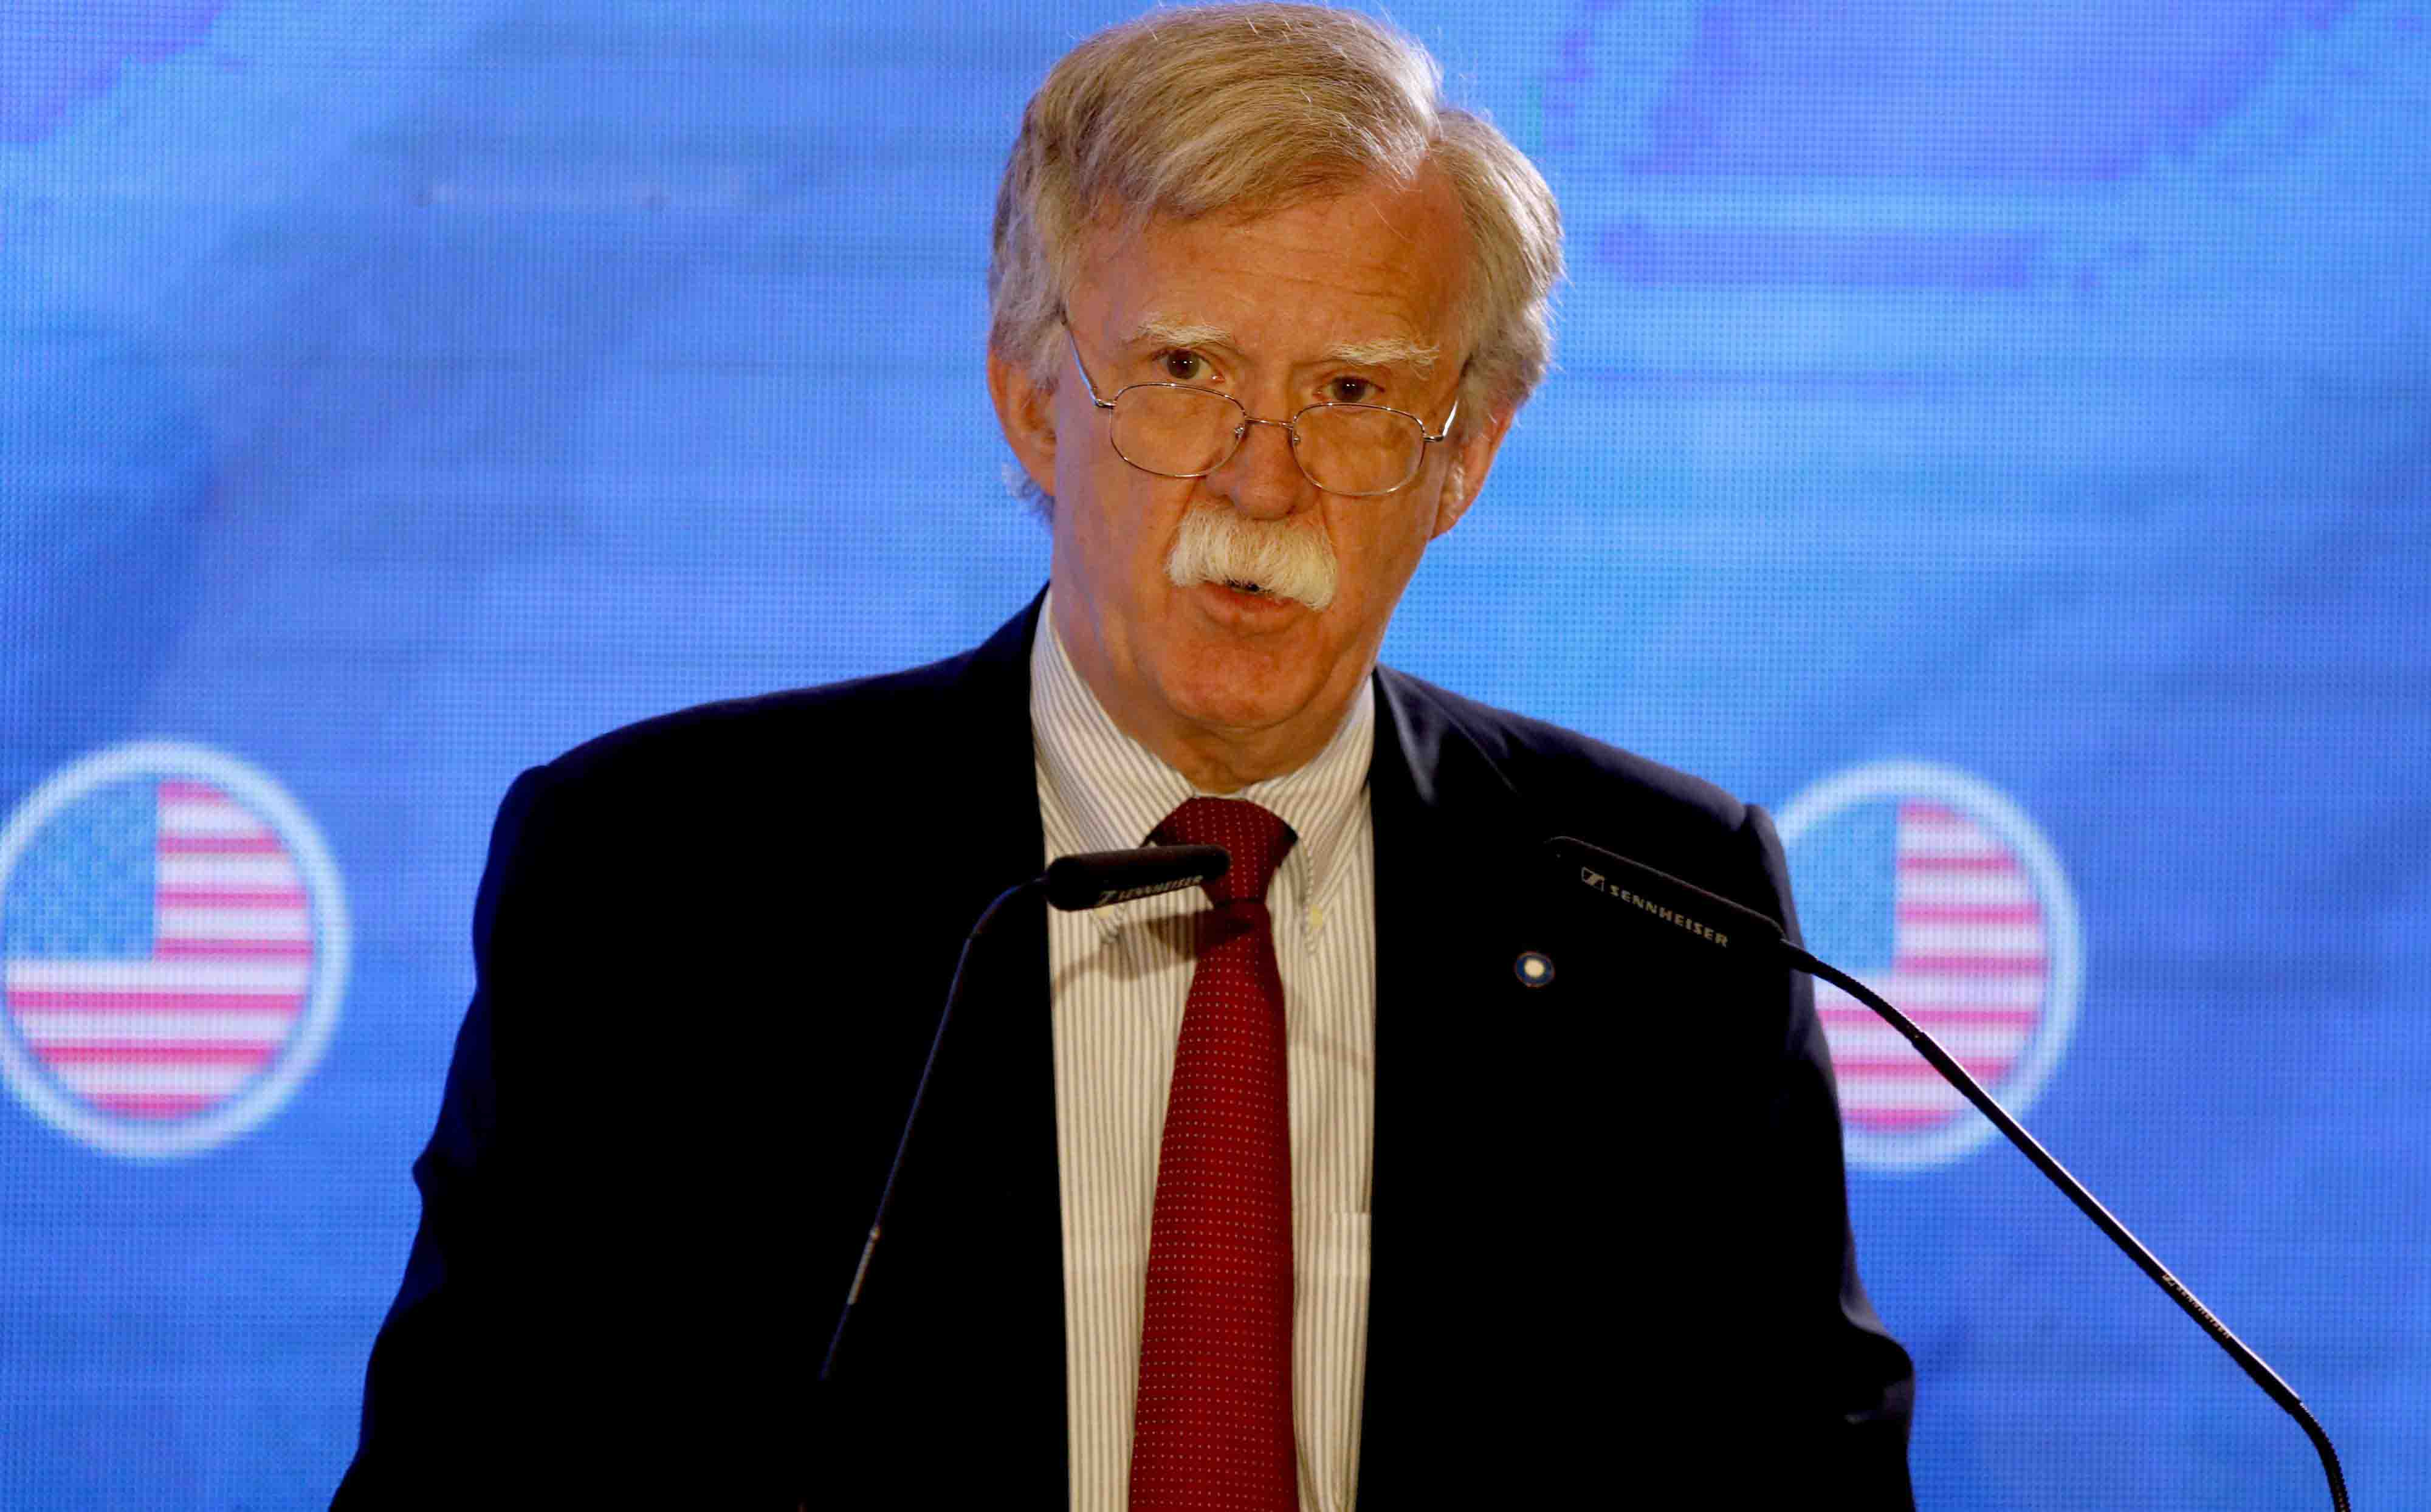 "The president has held the door open to real negotiations," Bolton told journalists in Jerusalem